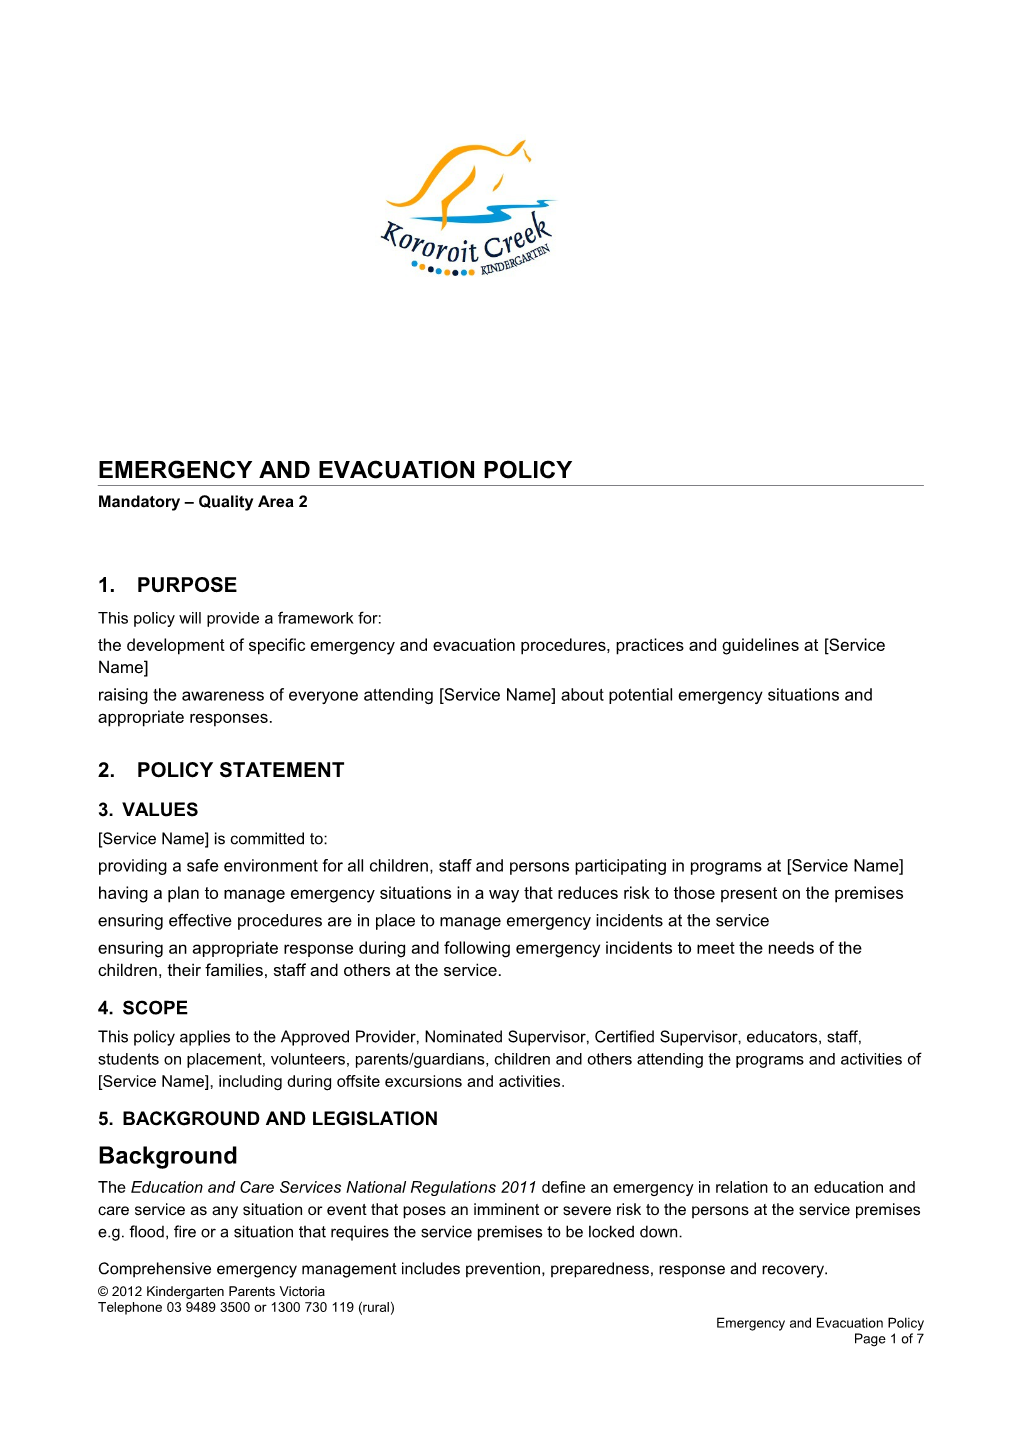 Emergency and Evacuation Policy